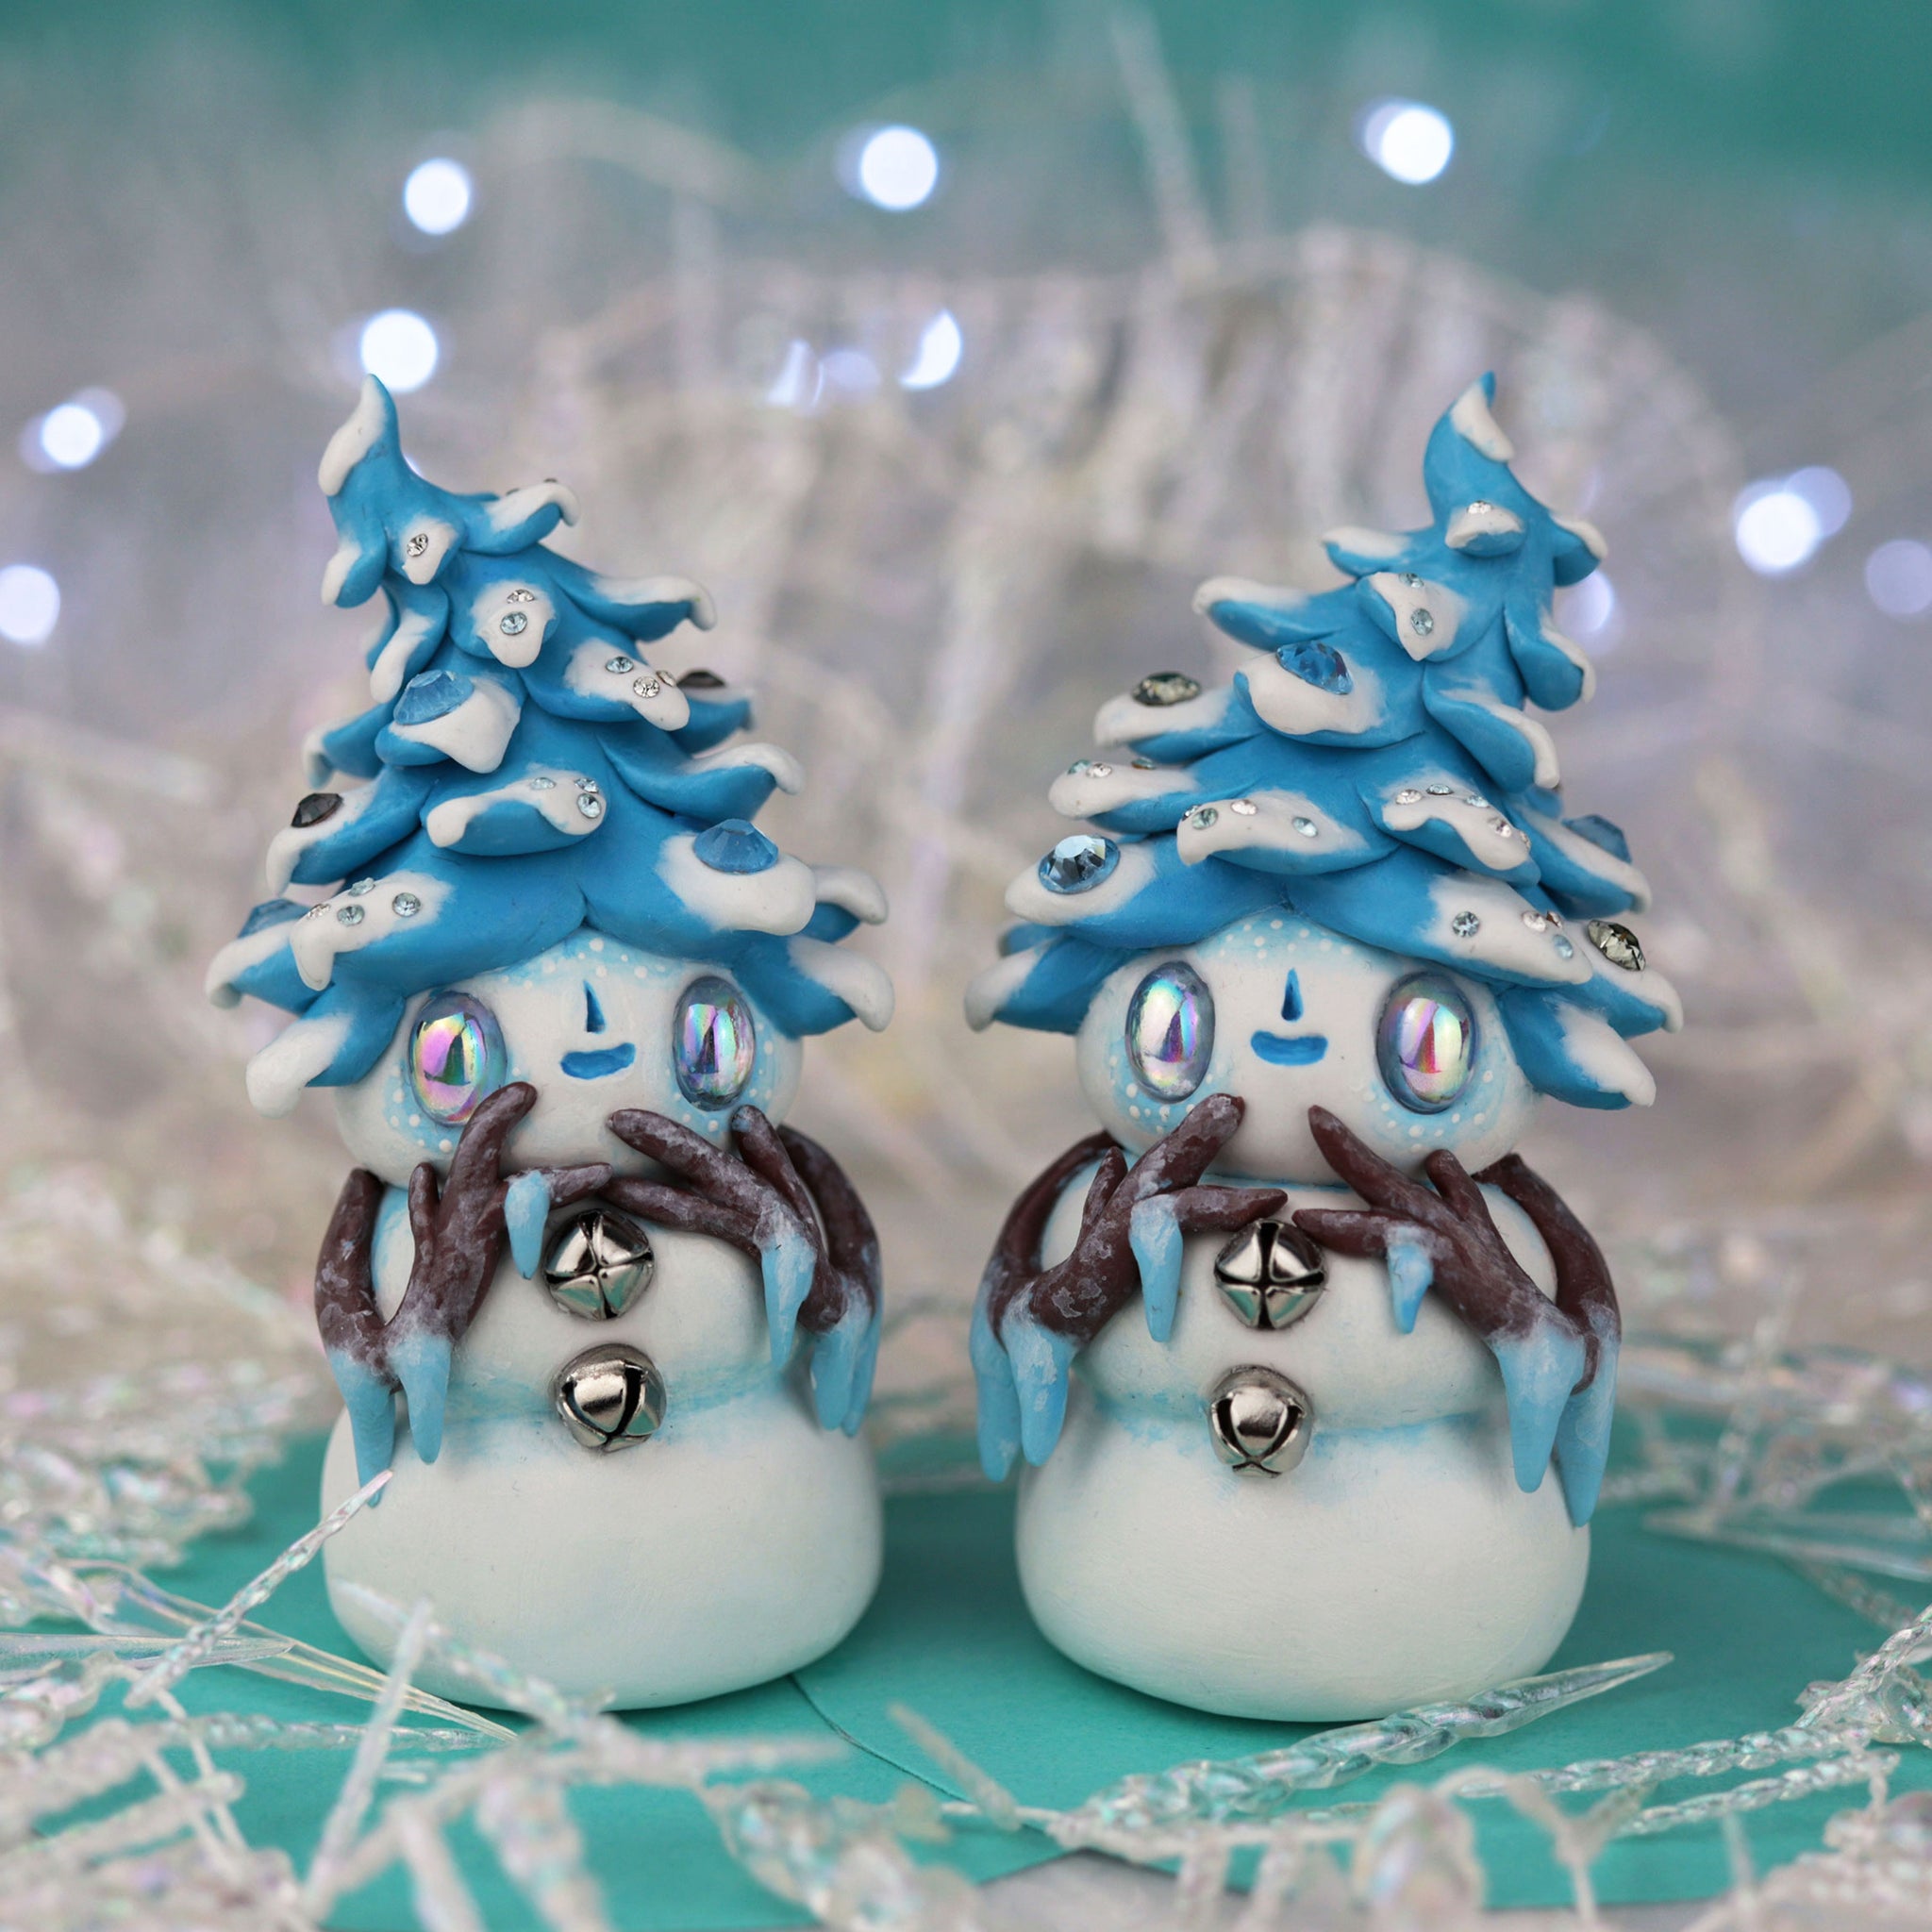 The Frosty Twins Figurines